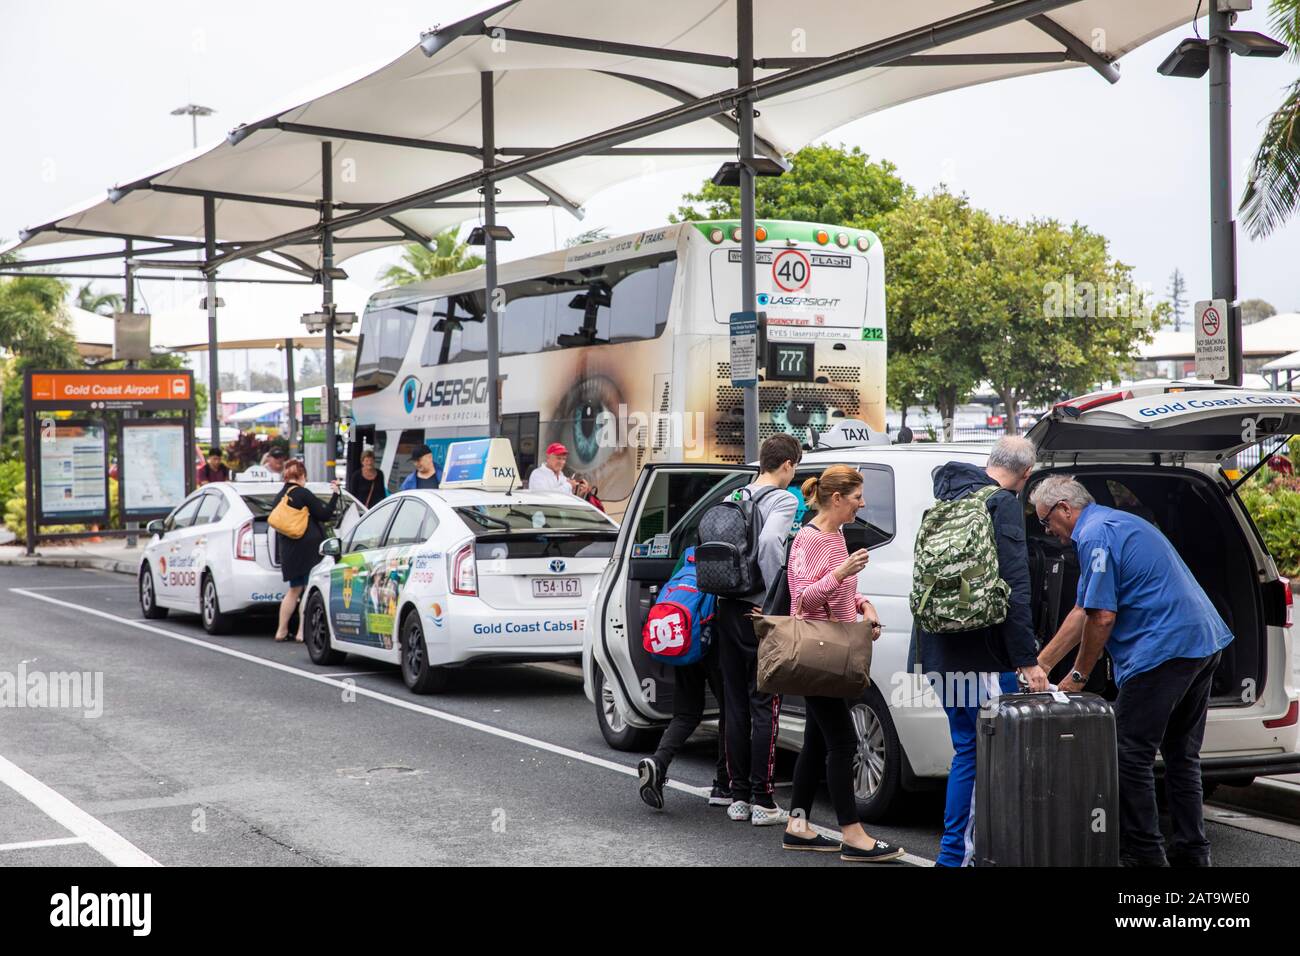 Gold Coast airport travellers at airport taxi rank where taxi driver helps load suitcases into the taxi,Queensland,Australia Stock Photo